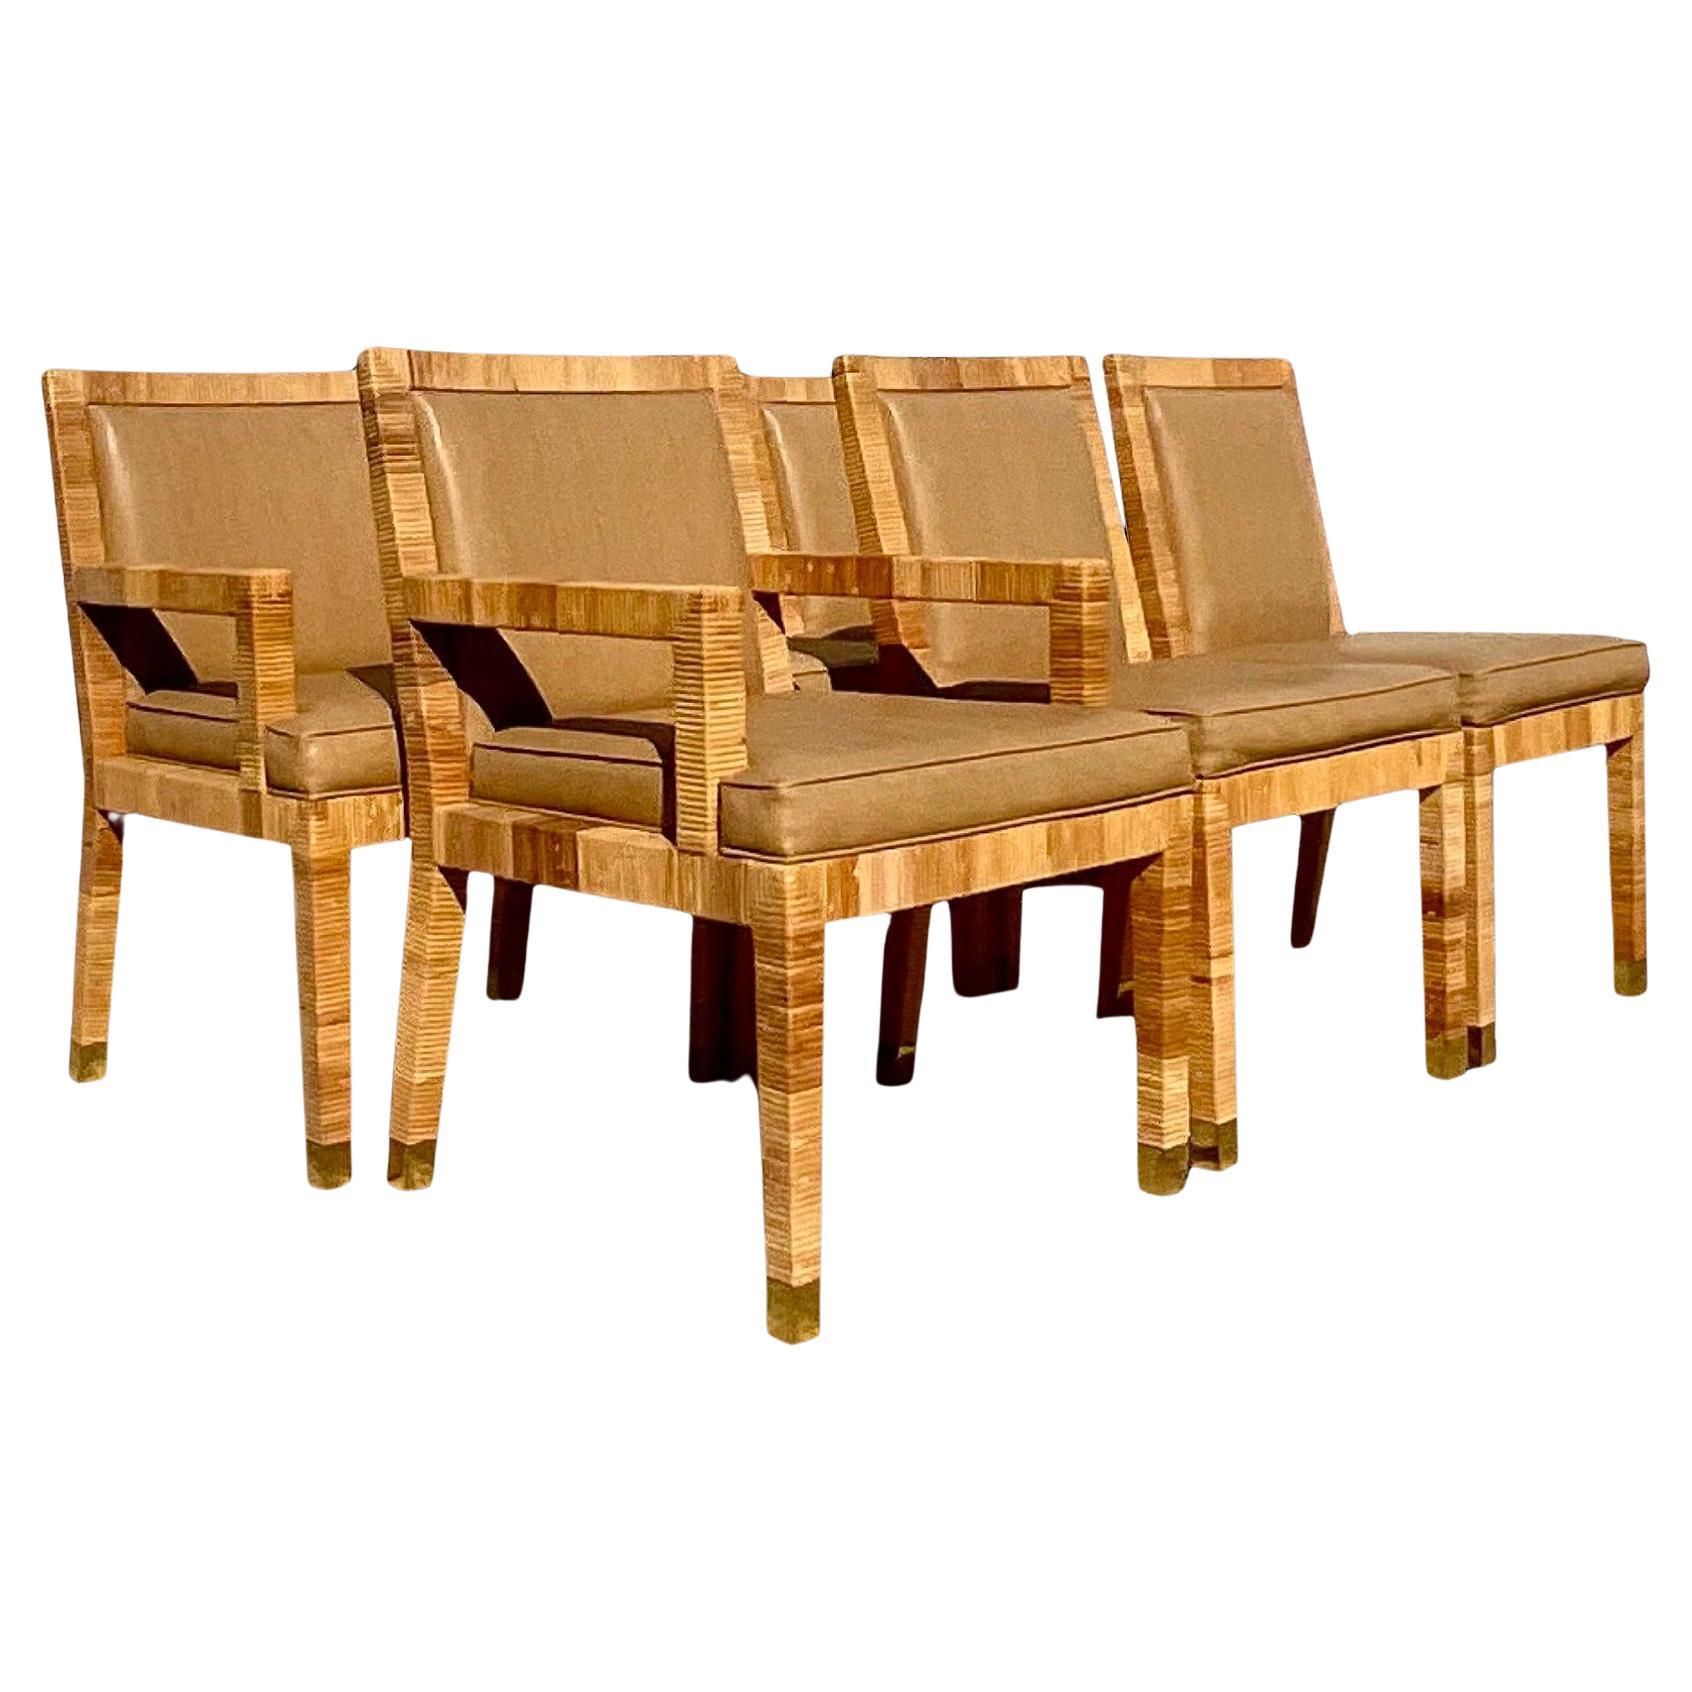 Vintage Coastal Bielecky Brothers Wrapped Rattan Dining Chairs - Set of 6 For Sale